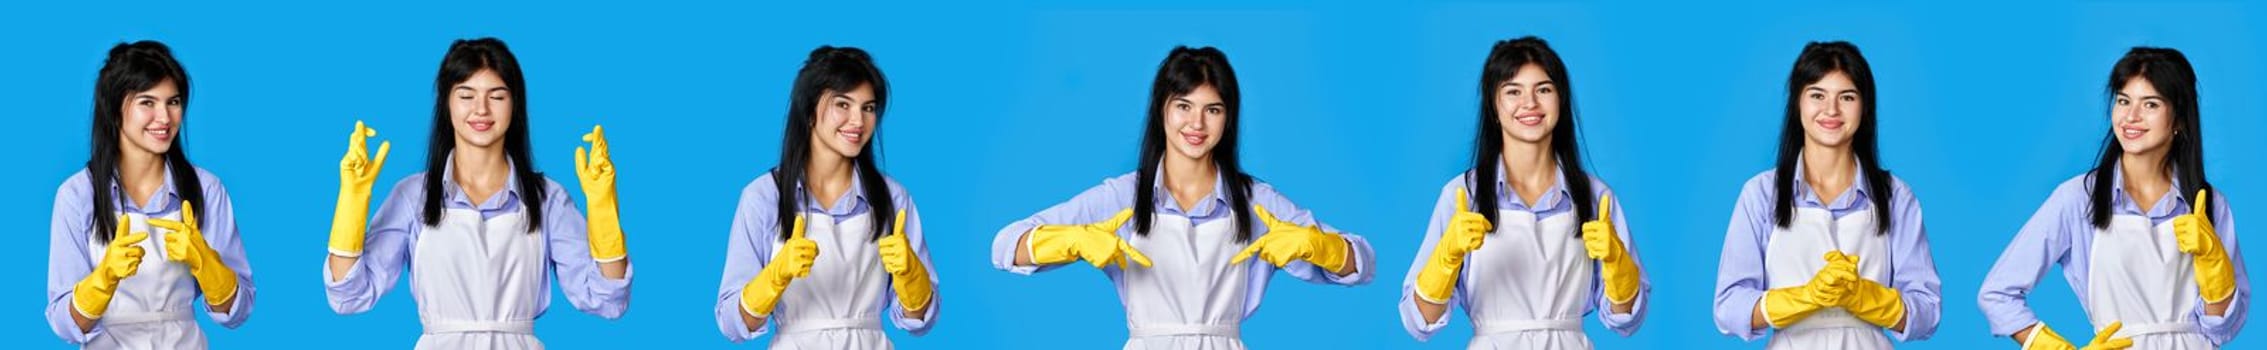 set of beautiful woman in yellow rubber gloves and cleaner apron showing different gesture isolated on blue background. cleaning